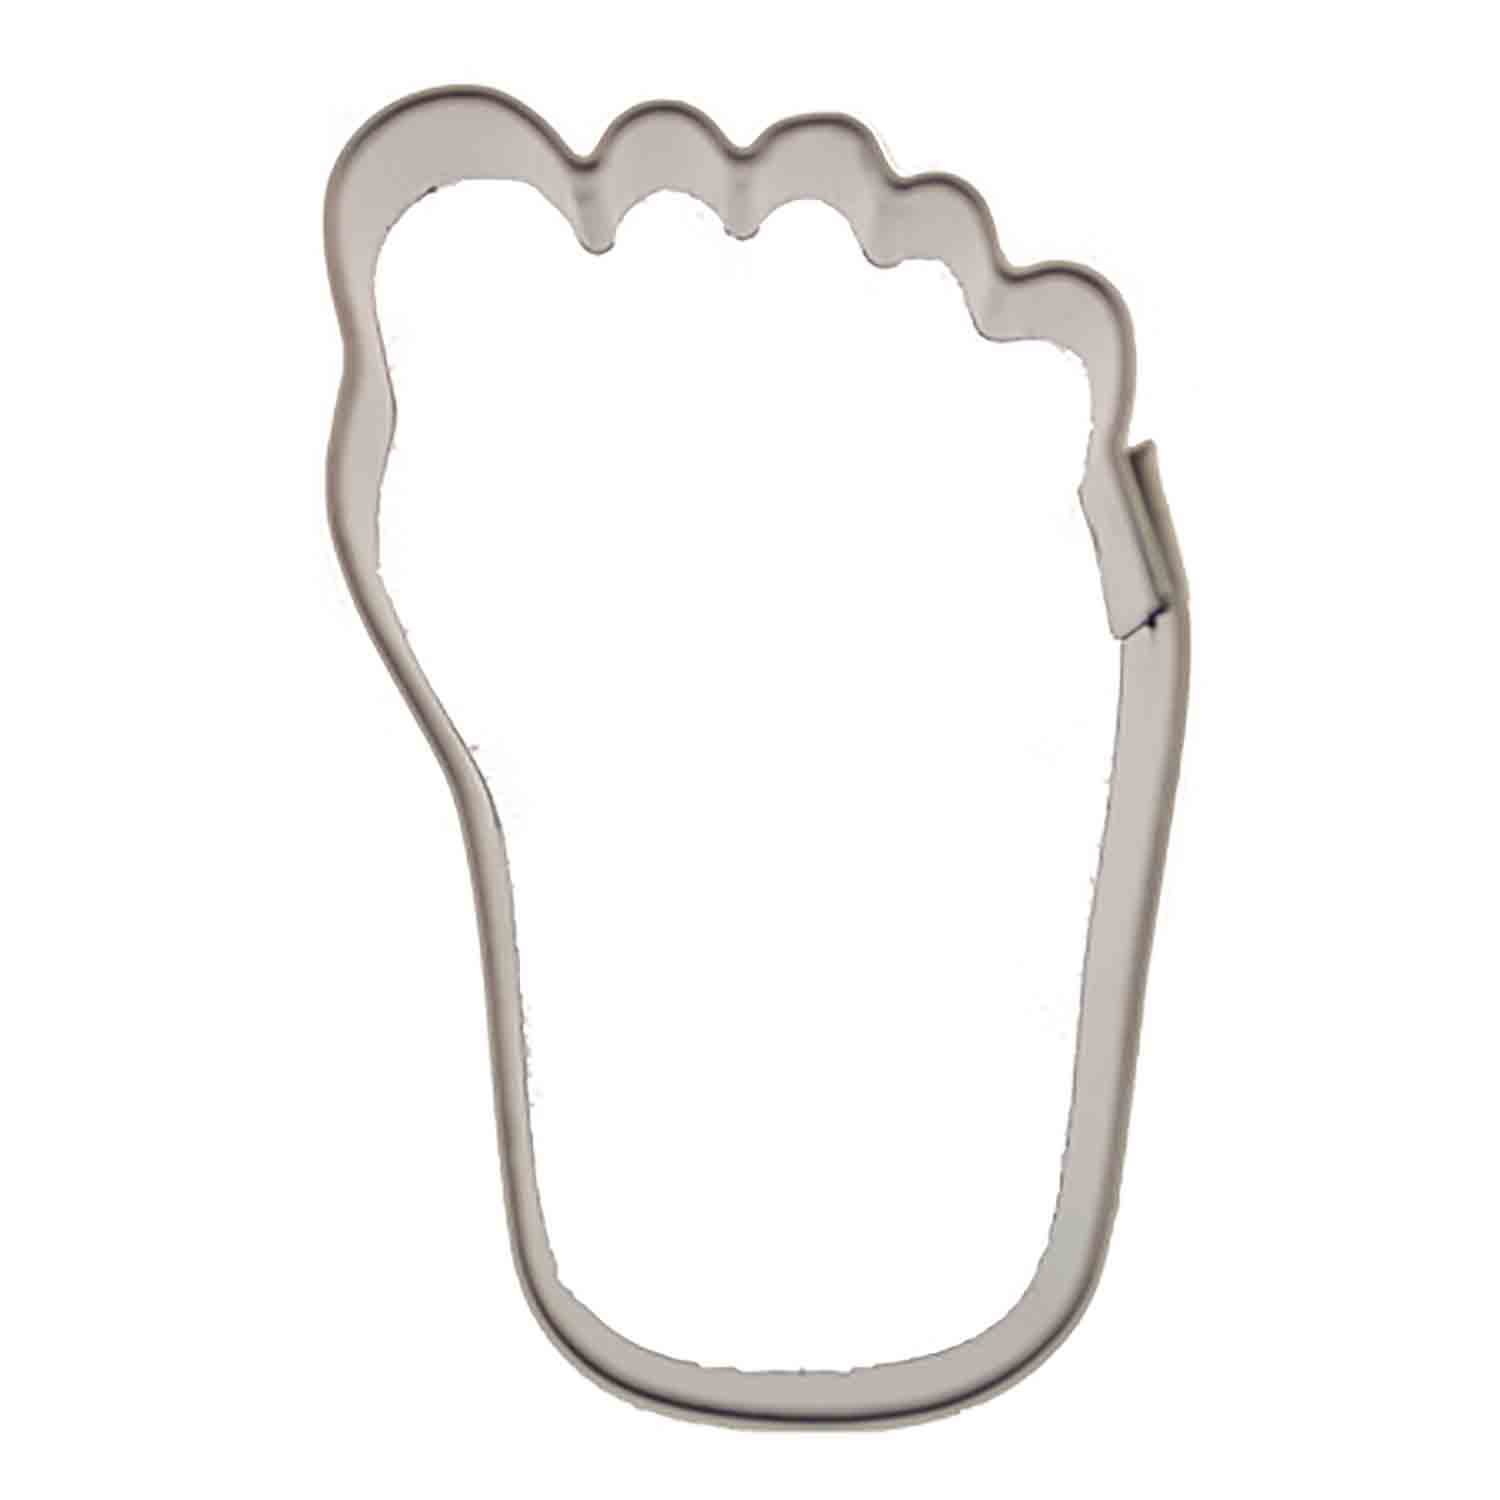 Mini Foot Cookie Cutter - RM-1544 | Country Kitchen SweetArt